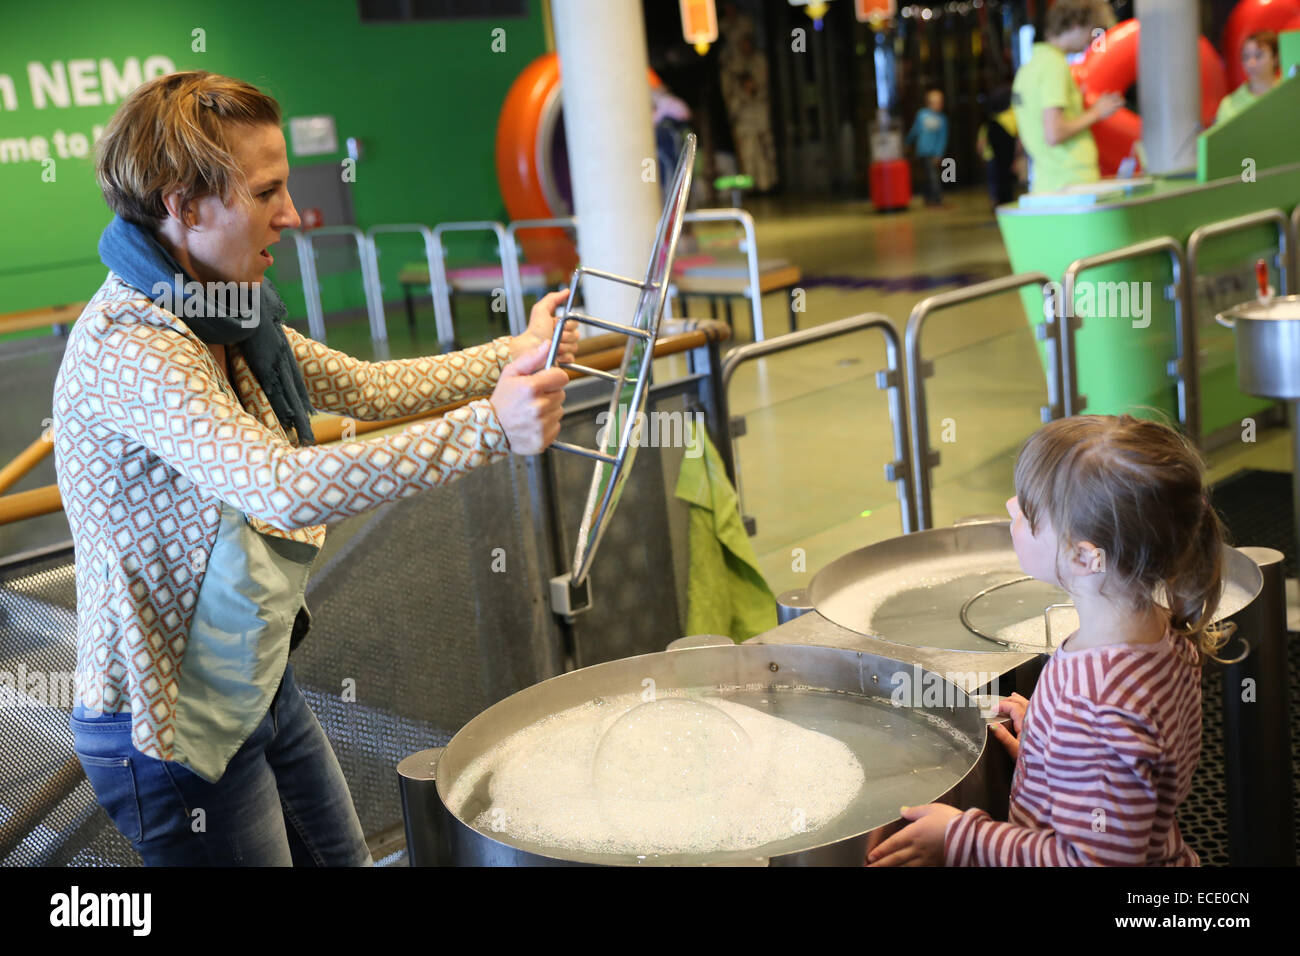 mother playing bubble daughter watching inside Nemo science centre Stock Photo